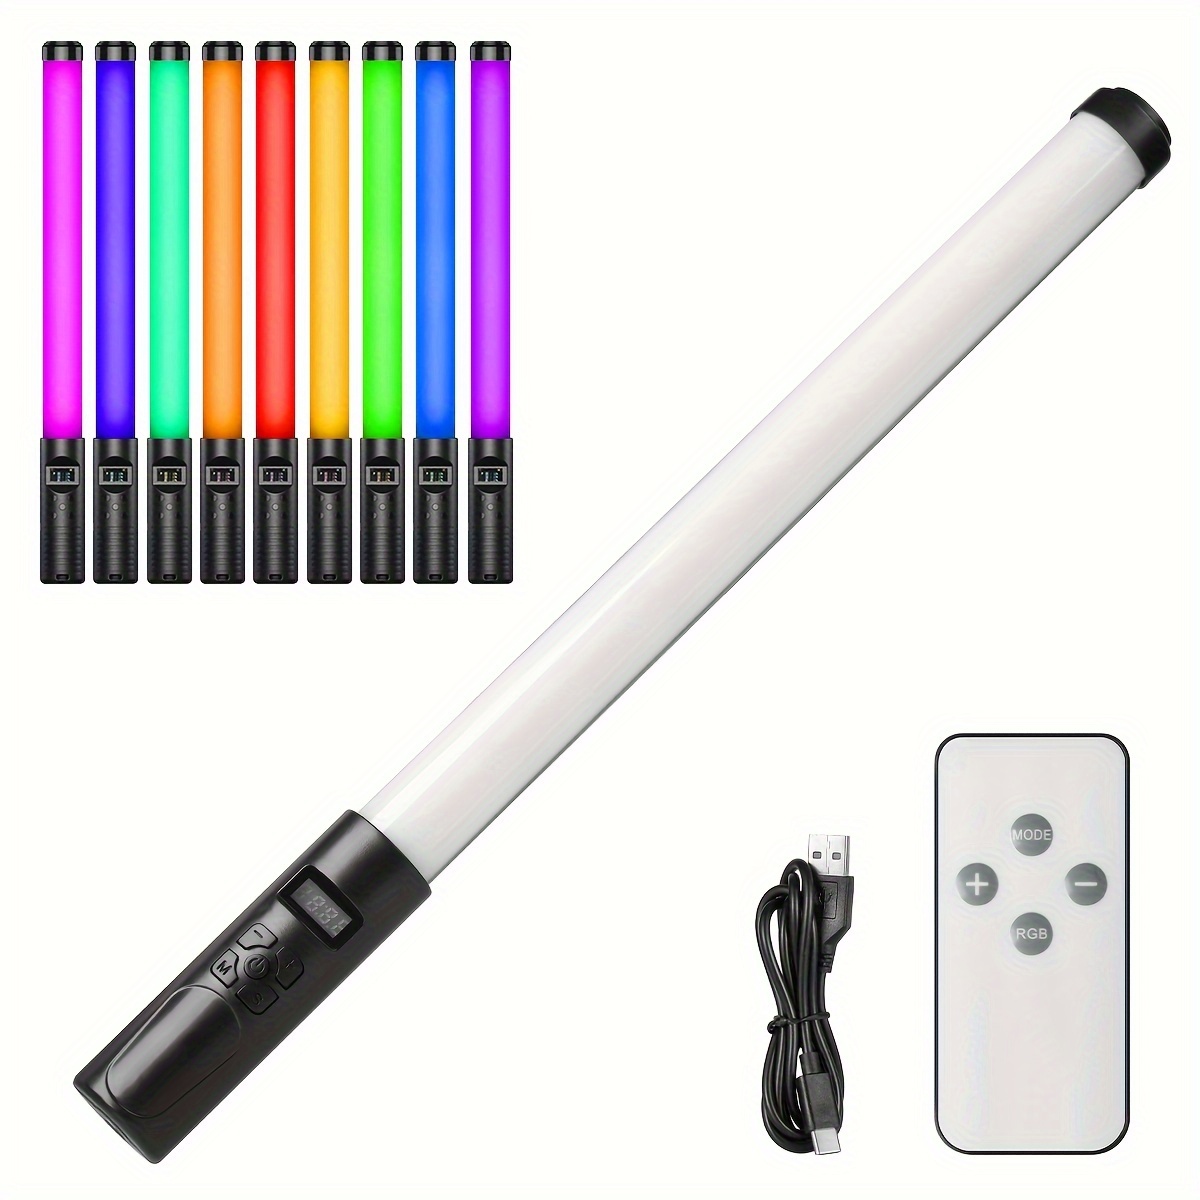 RGB LED Video Light Stick: Handheld Photography Light Wand with Light  Stand, Magnet, and 29 Scene Modes for Vlogging and YouTube Shooting!